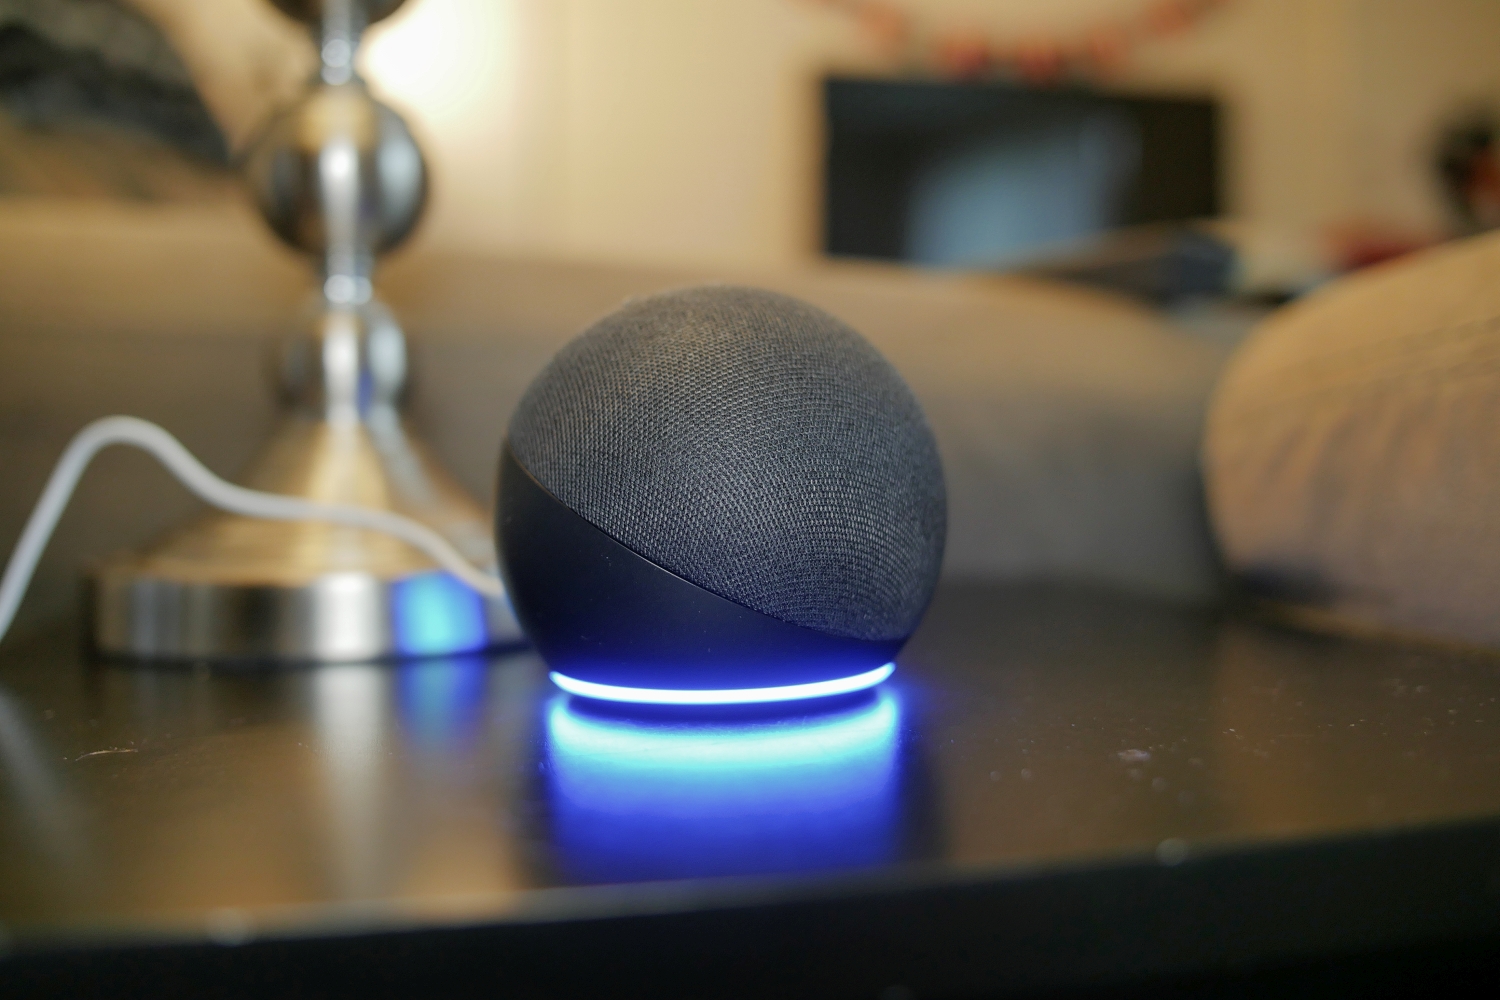 Dialog Introduces  Alexa Voice Command Support